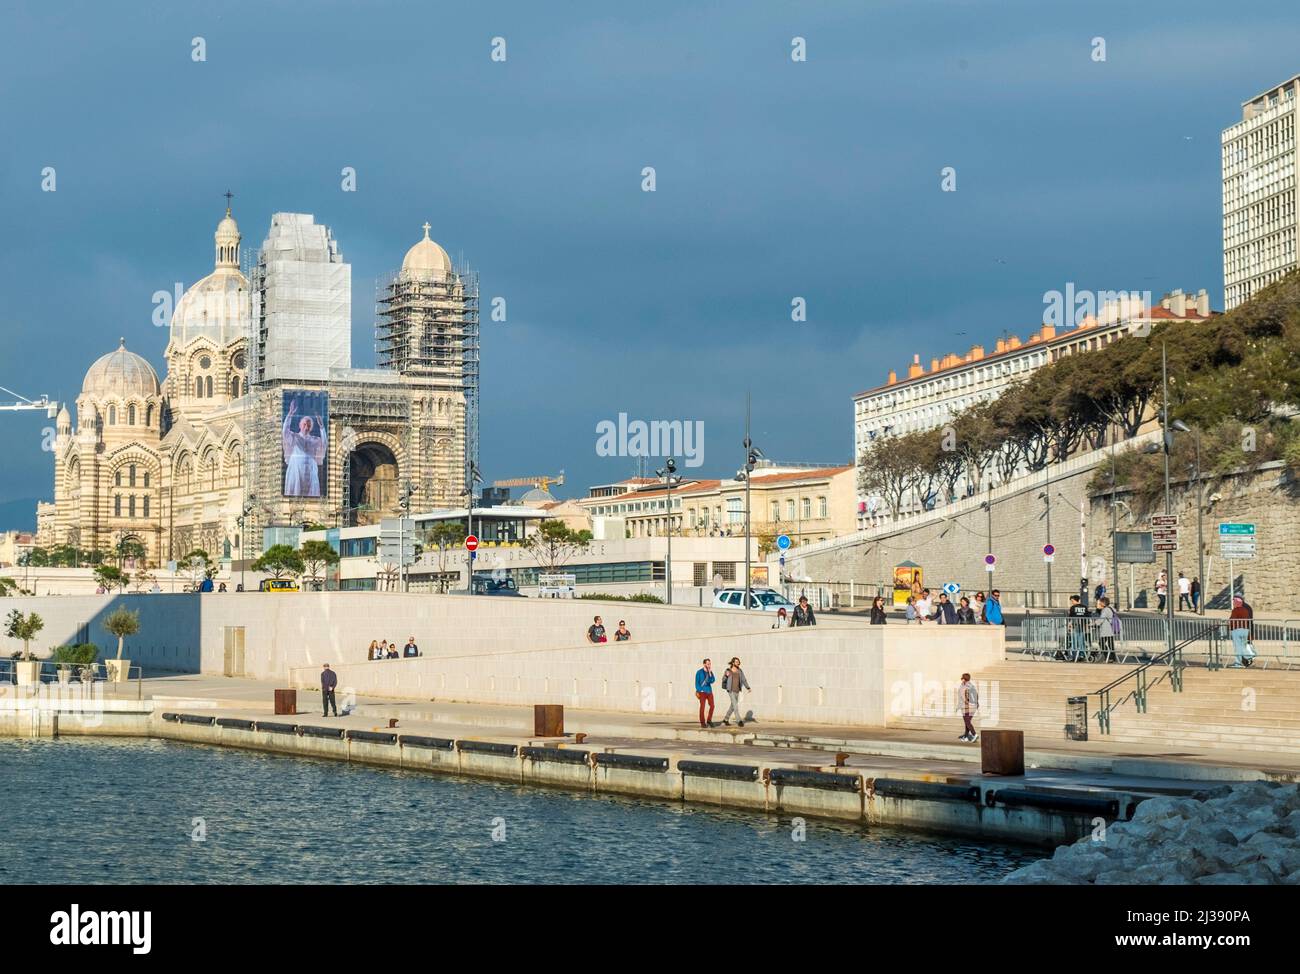 MARSEILLE, FRANCE - OCT 31, 2016: The majestic facade of magnificent Cathedral of Saint Mary Major Stock Photo